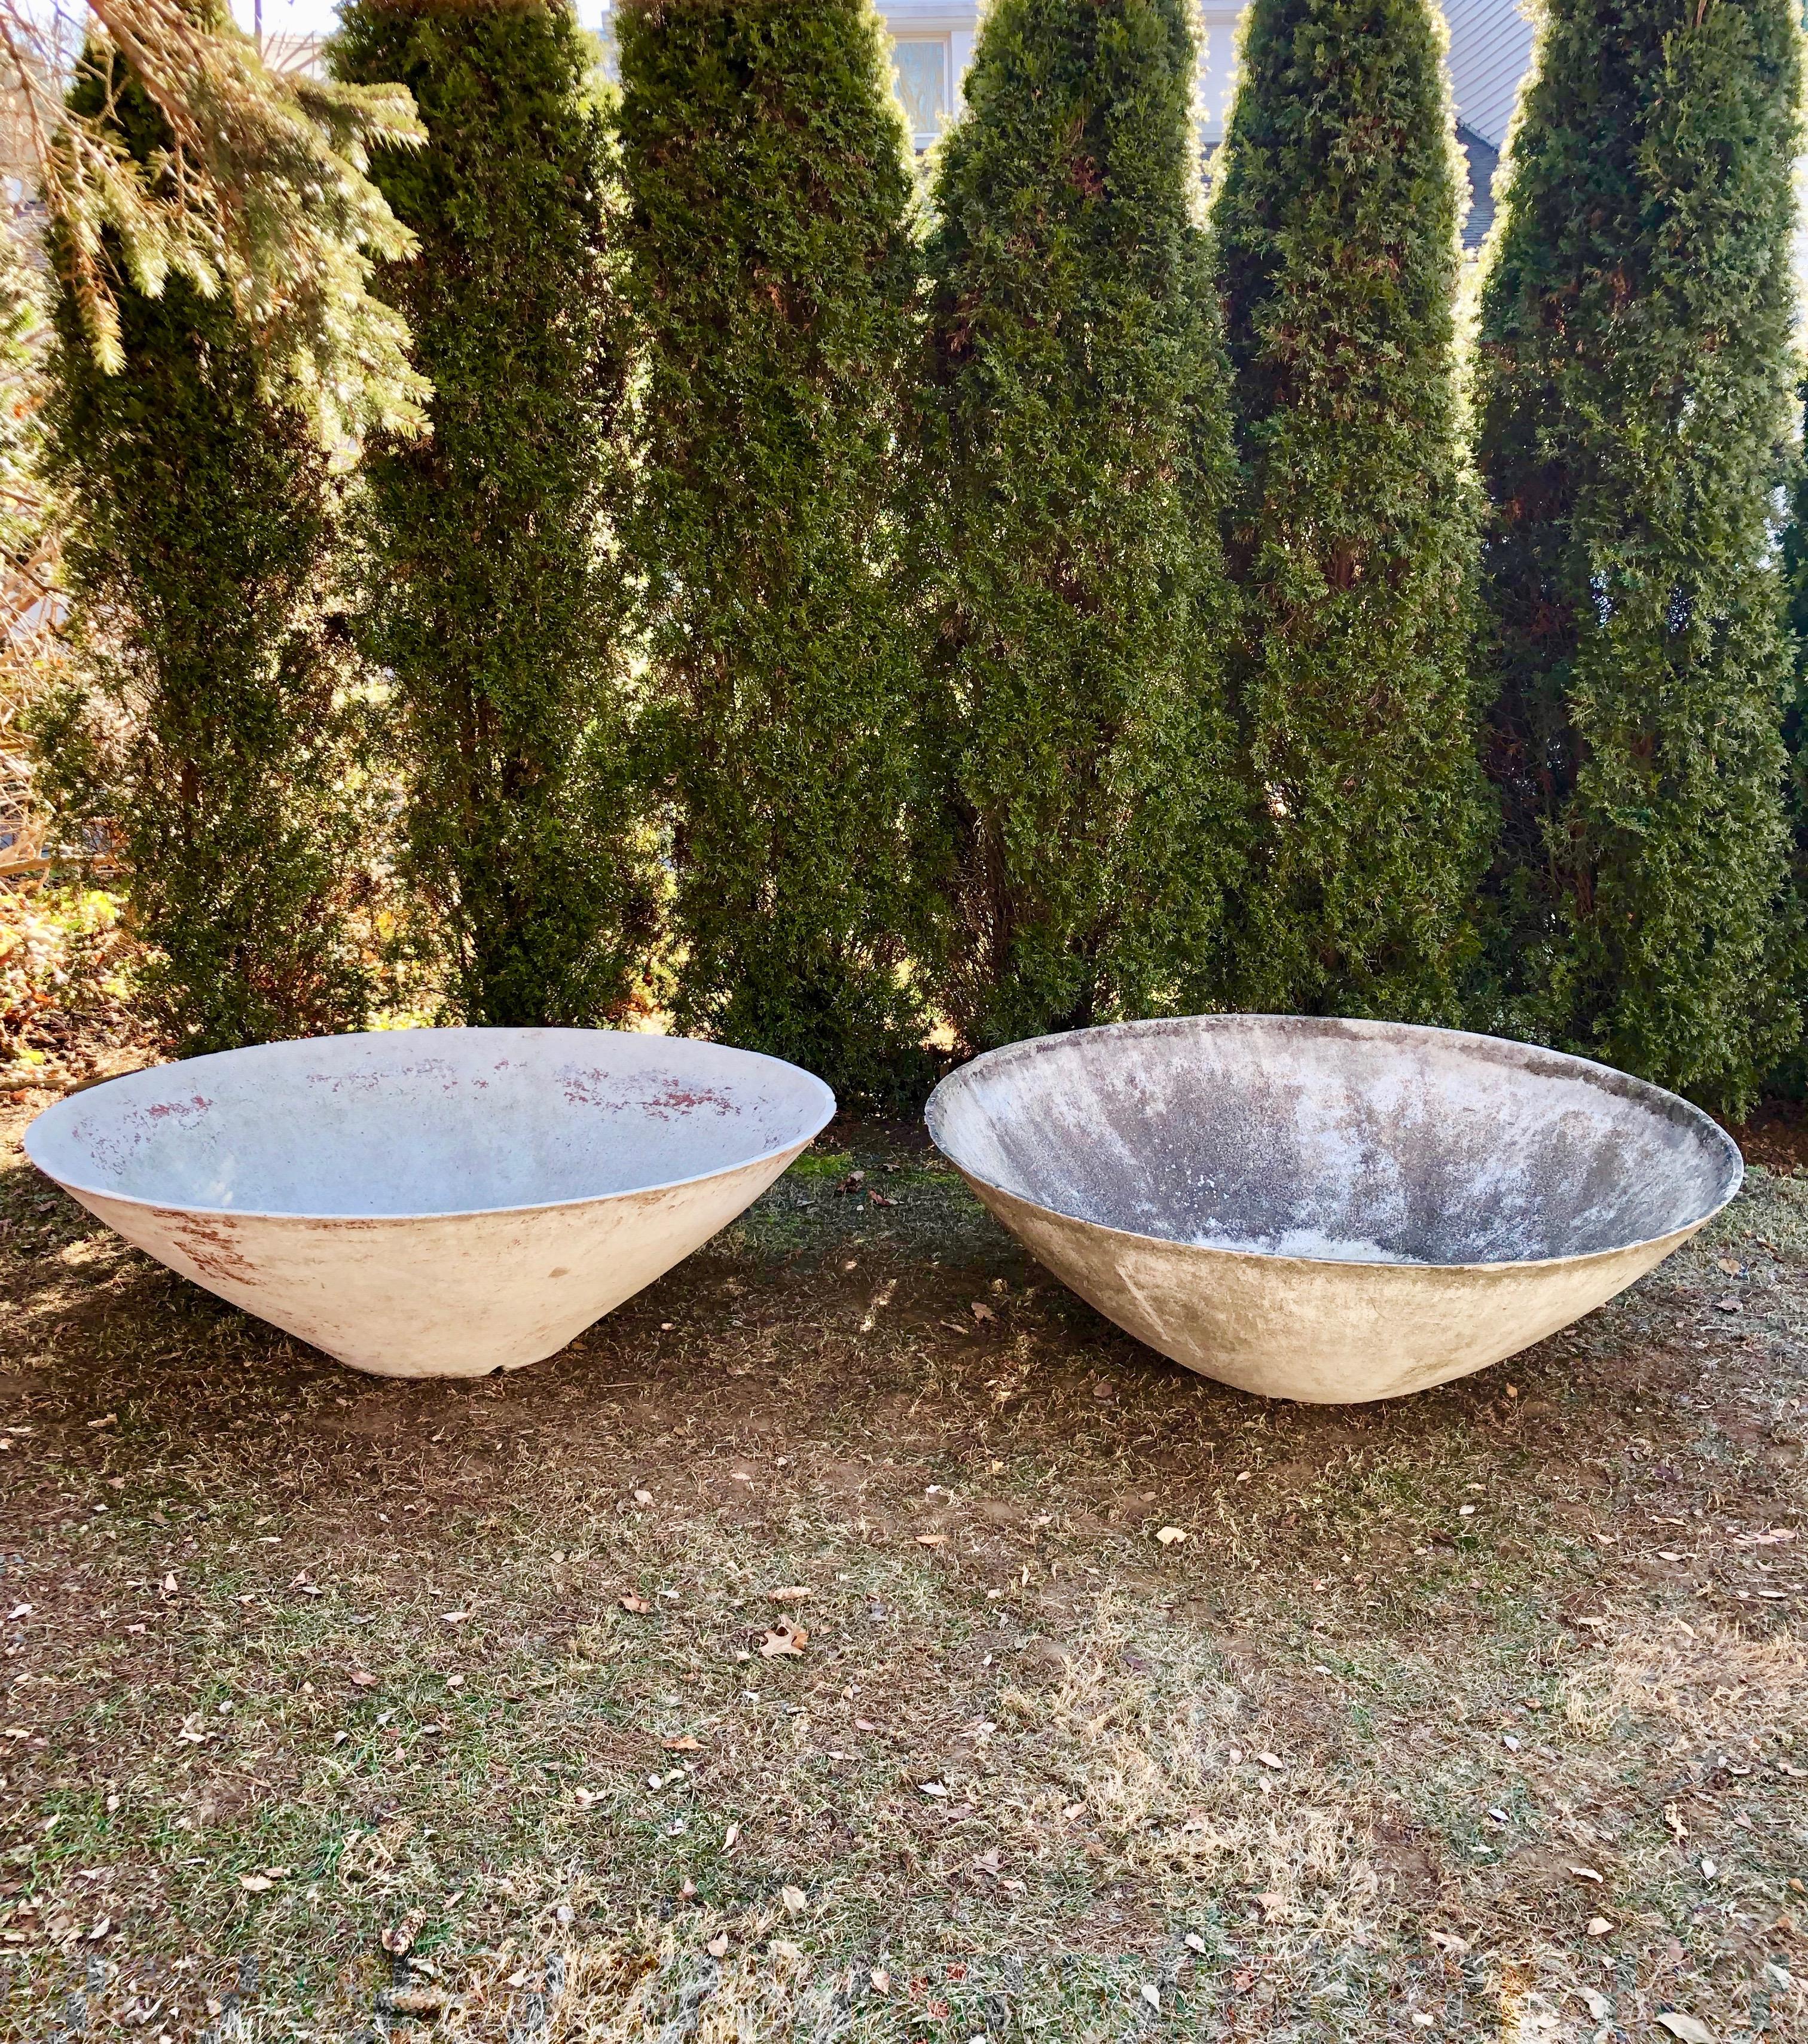 Mid-Century Modern Enormous Eternit Canted Bowl Planter Designed by Willy Guhl #2 For Sale